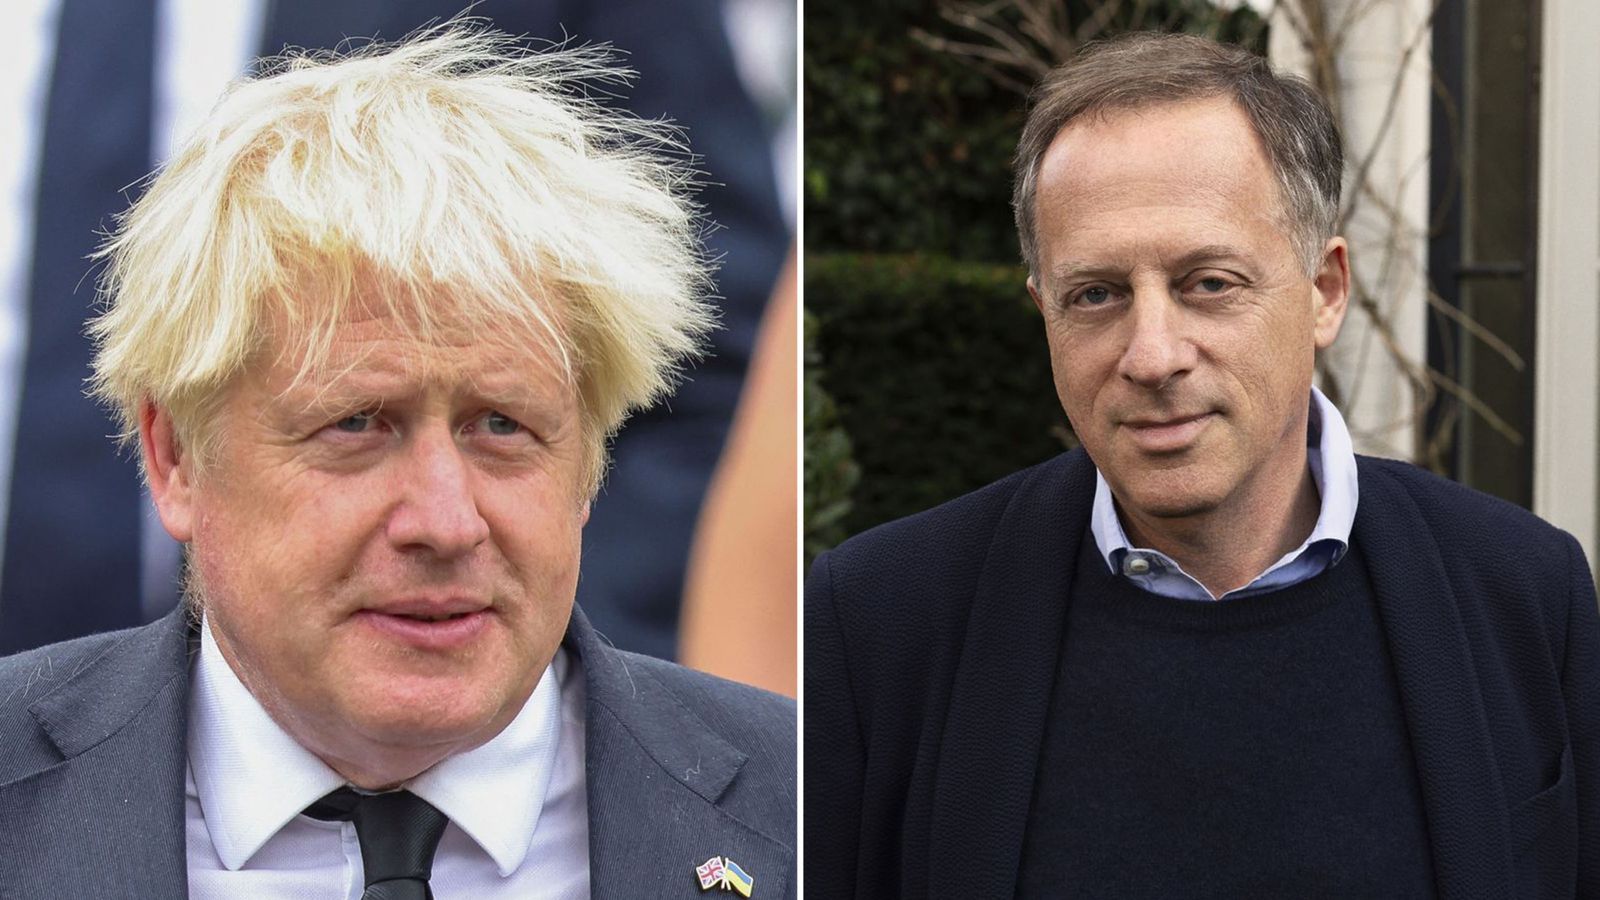 Boris Johnson told to stop asking Richard Sharp for financial advice days before he was made BBC chair – reports